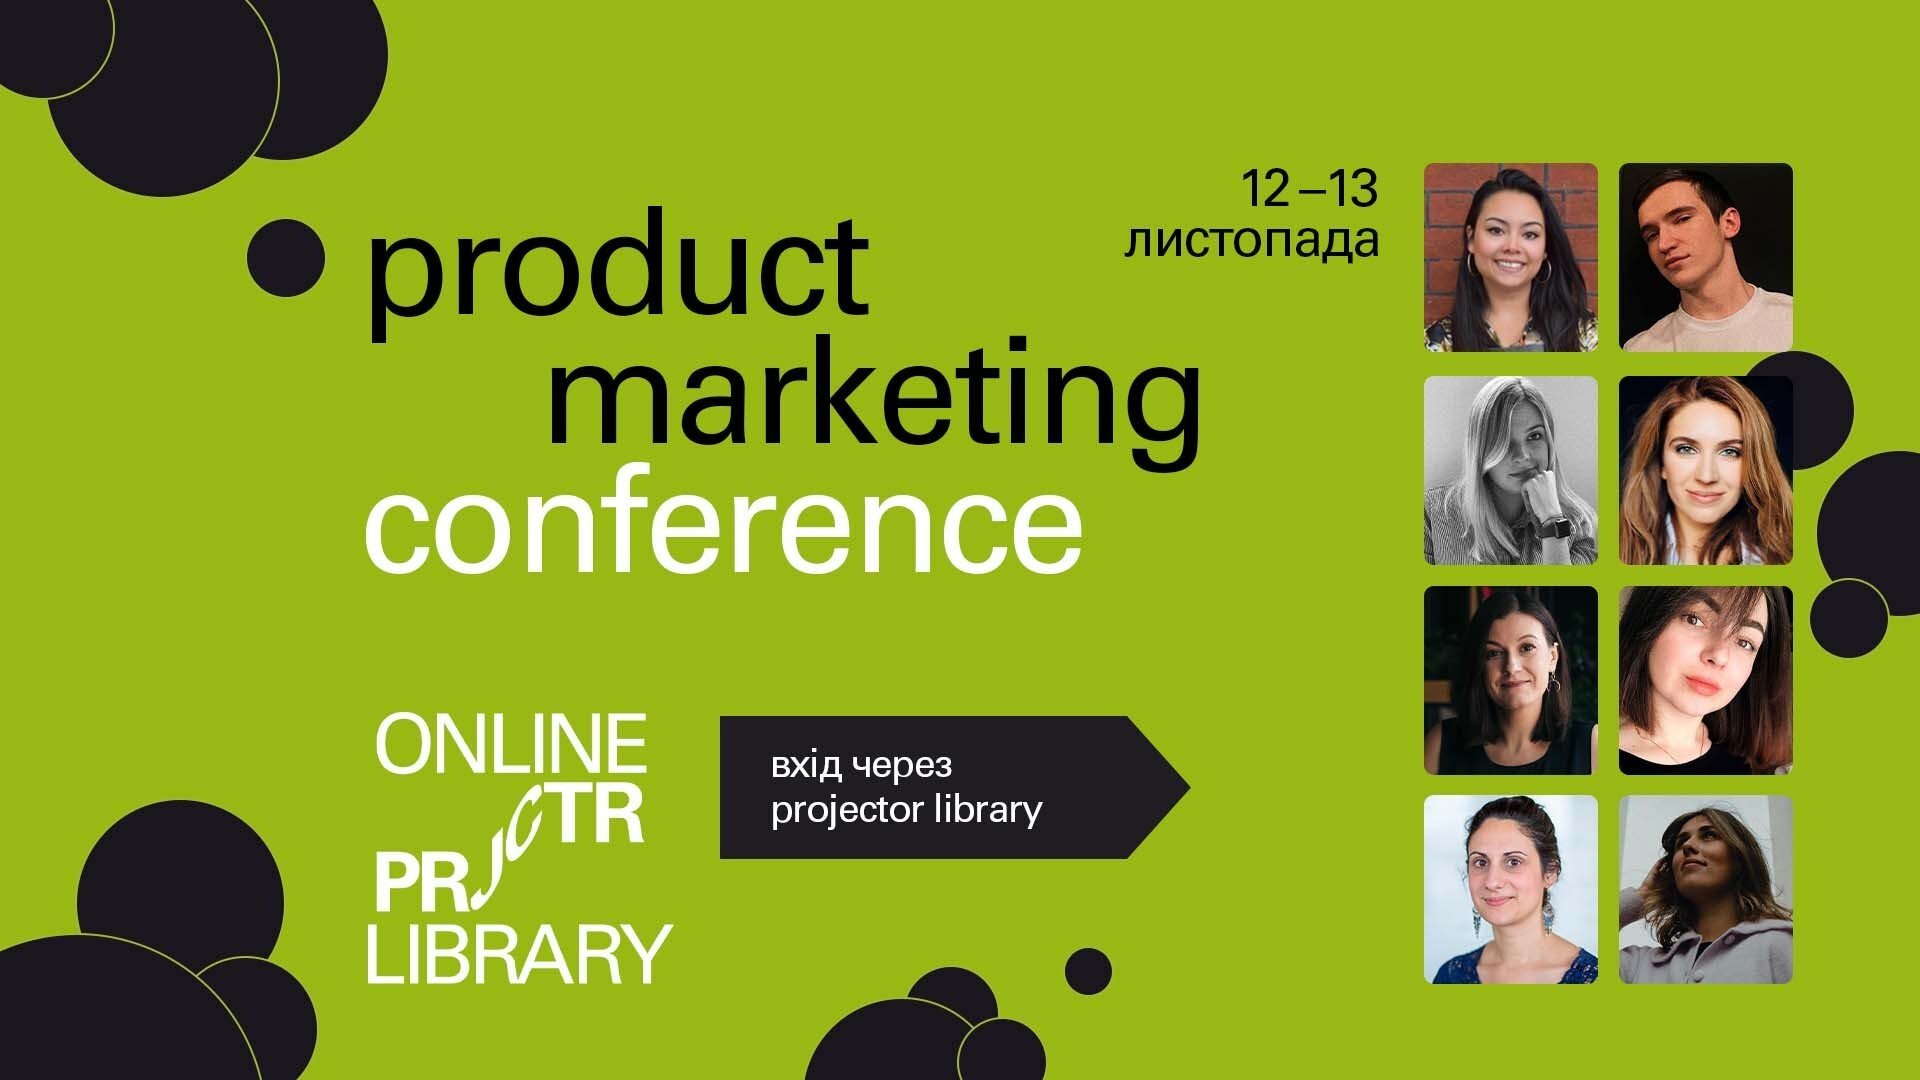 "Product Marketing Conference"/https://prjctr.com/